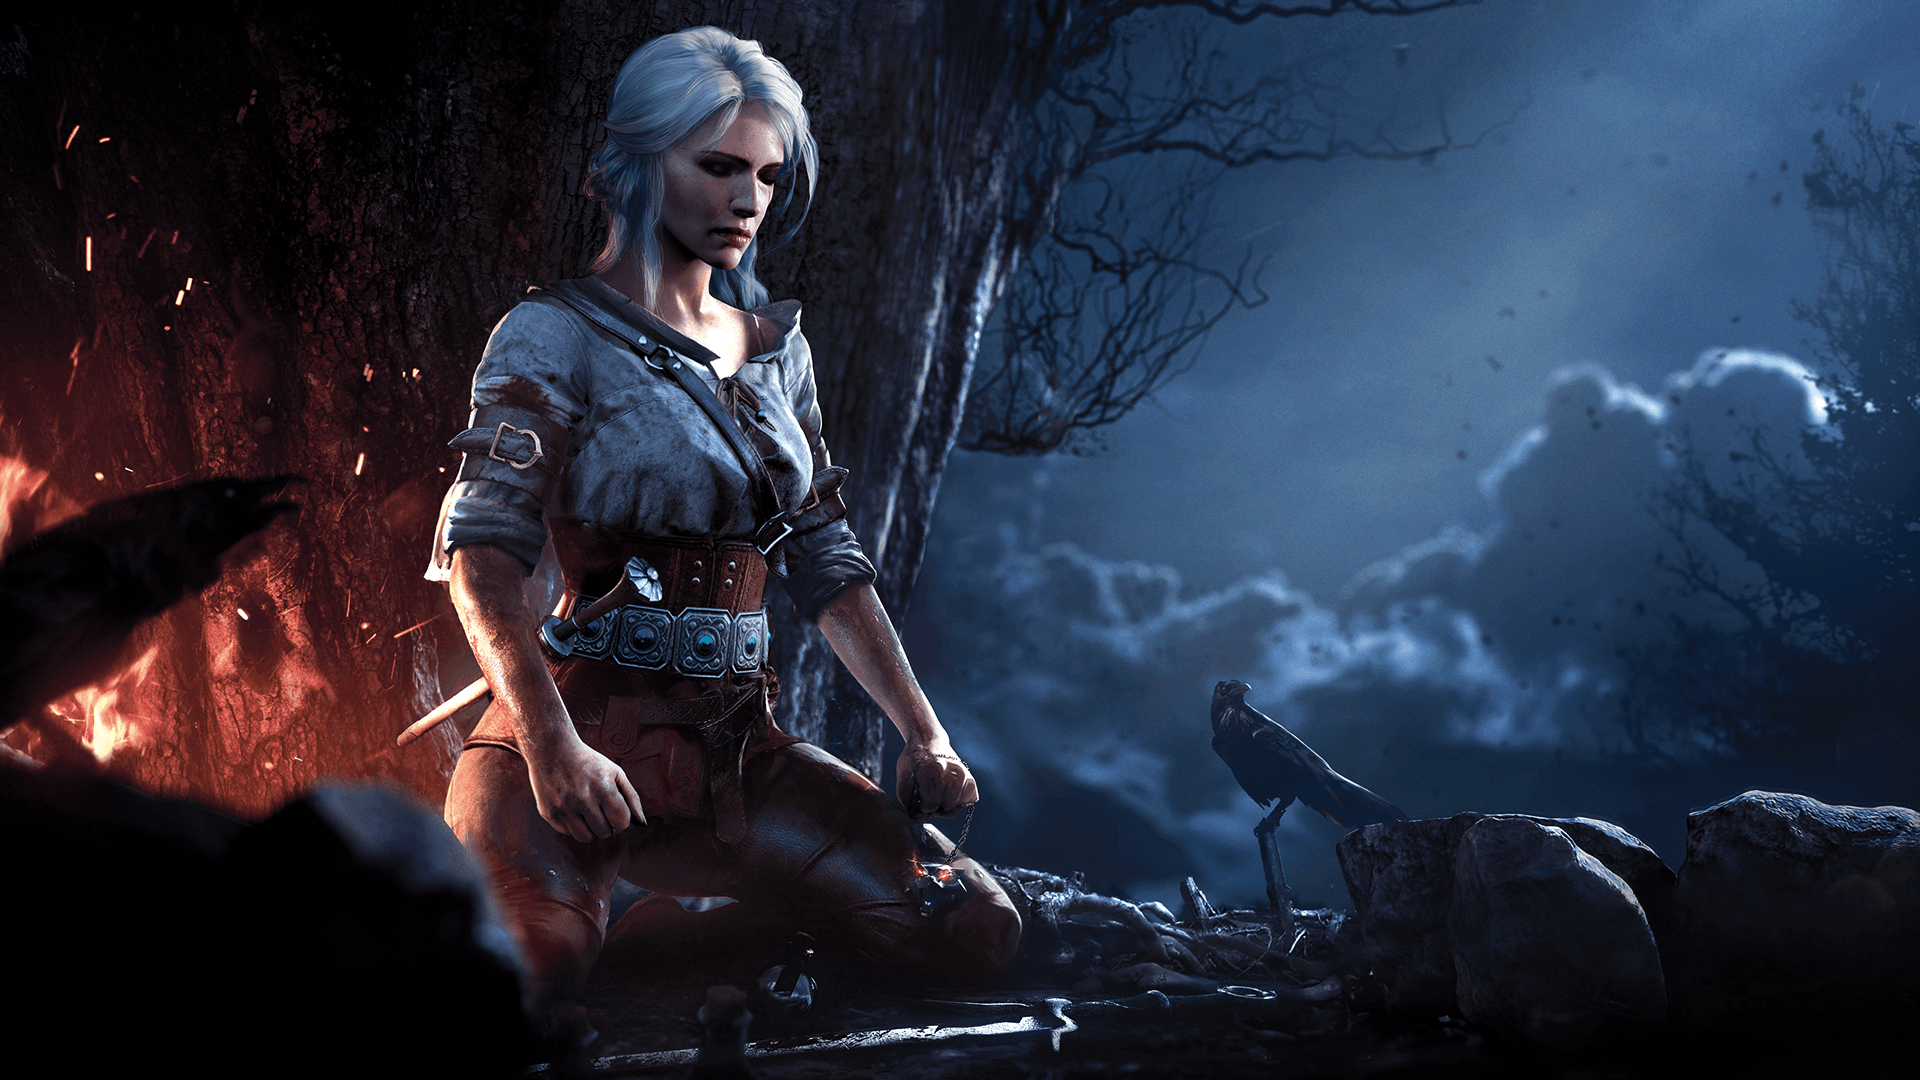 Ciri meditating wallpaper. The witcher The witcher